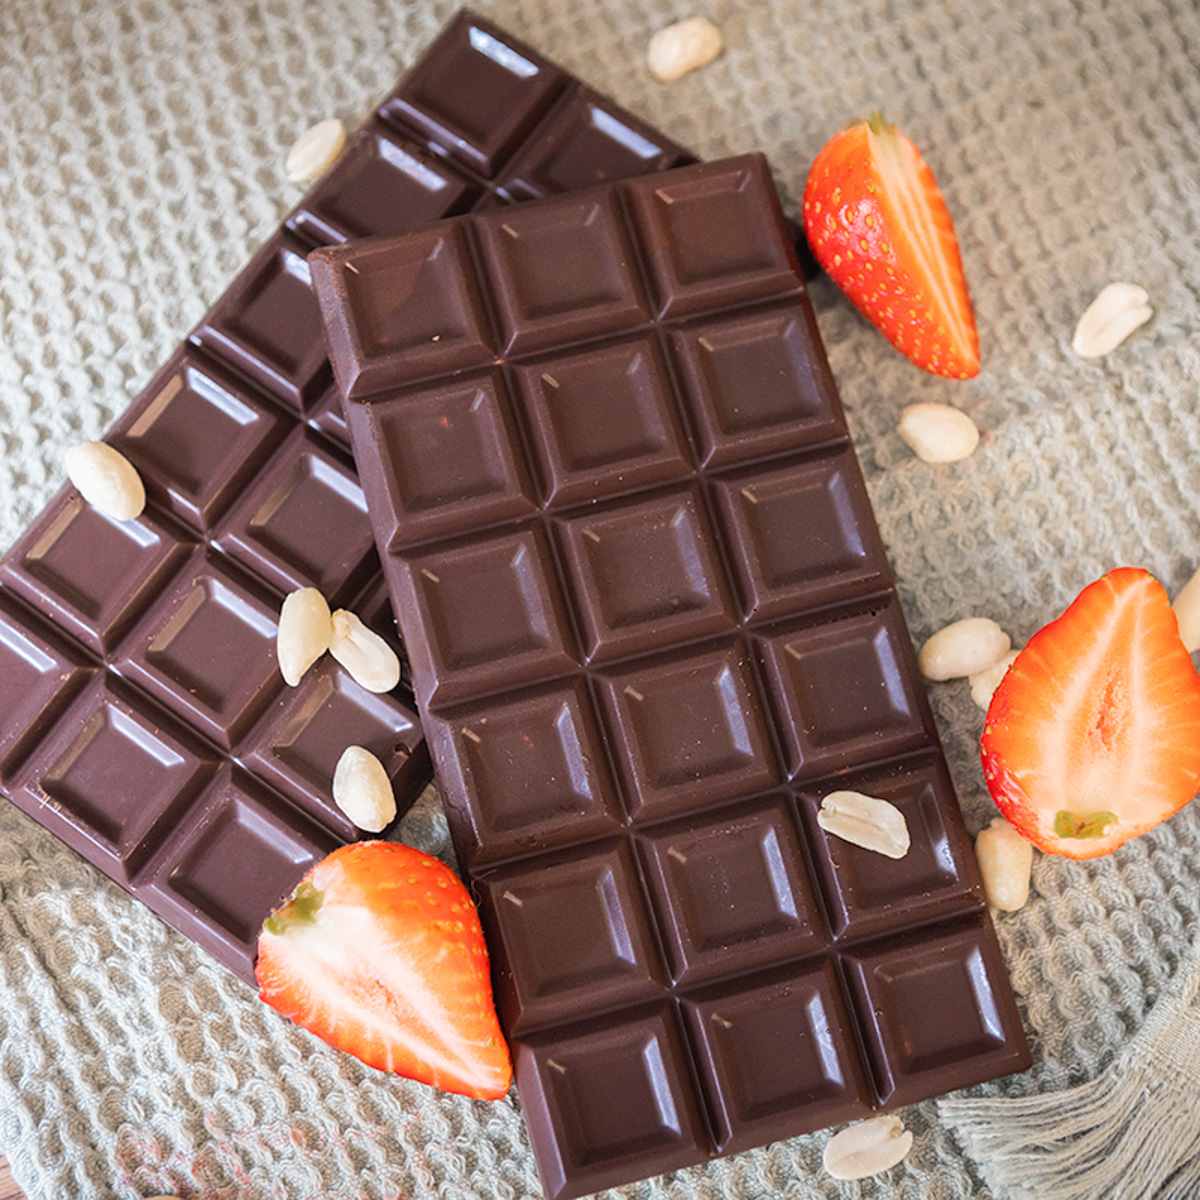 Two bars of chocolate with pieces of strawberries and nuts scattered around.